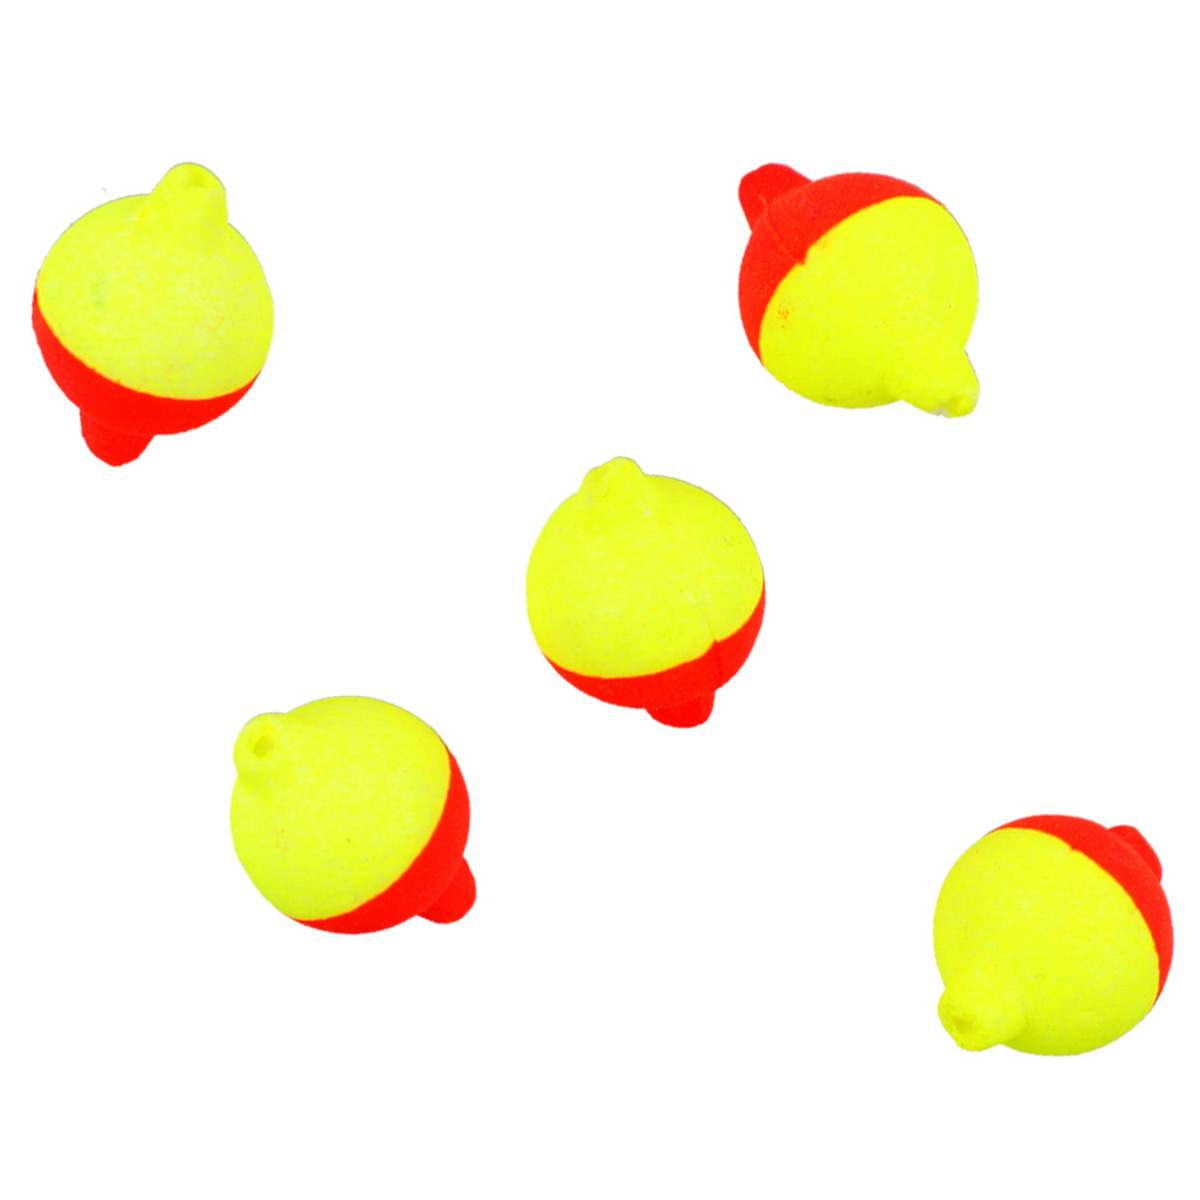 Mikado Surfcasting Ballsfloating Diameter - 8mm  RED AND YELLOW